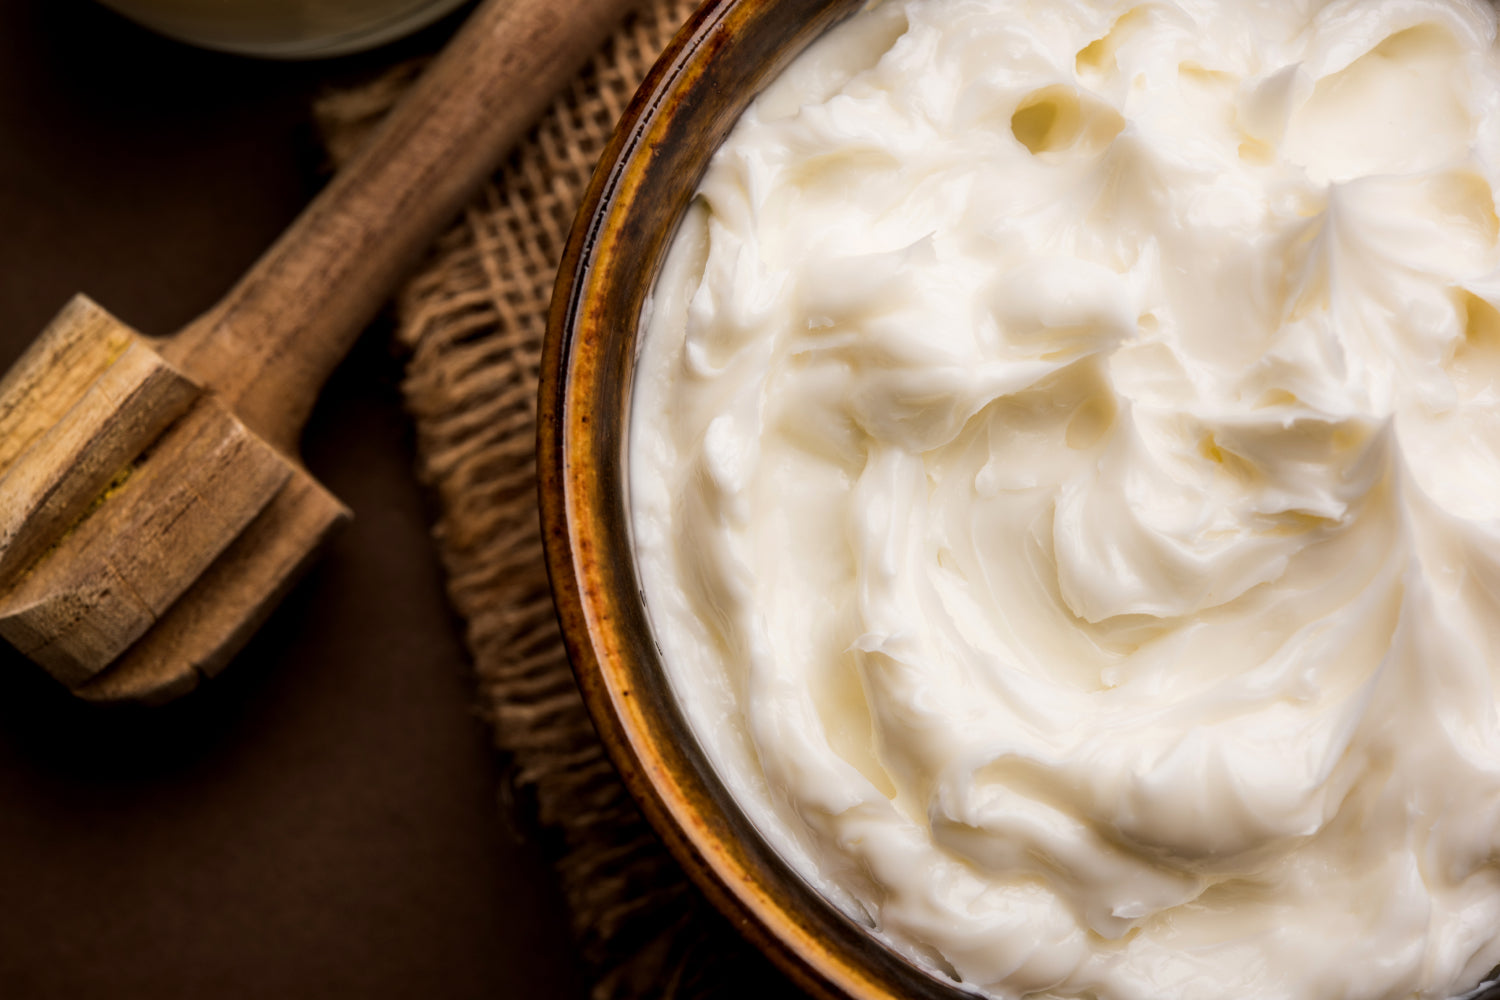 Shea Butter on Tattoos: Is It Safe?